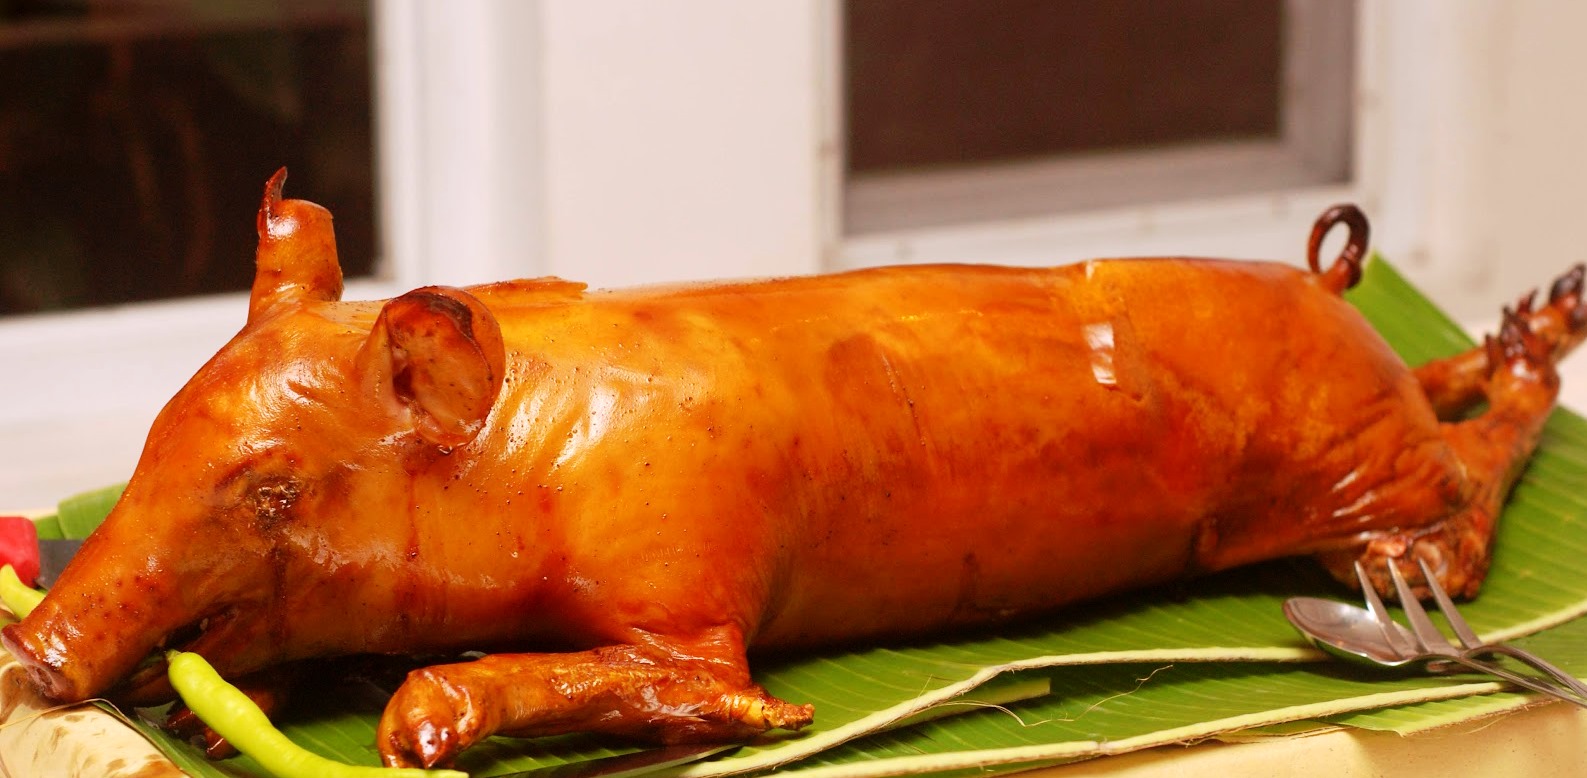 The lechon is the king of noche buena, and is present in Christmas dinners of those who can afford it.